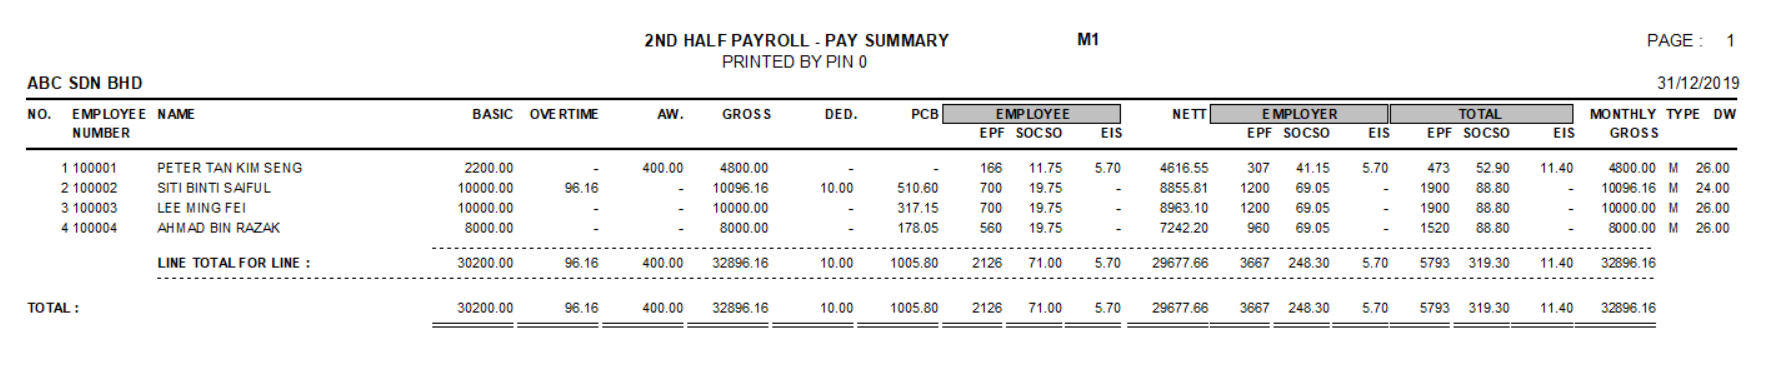 Access UBS Payroll Software - Pay 100 - (Compliance with EIS 2018)